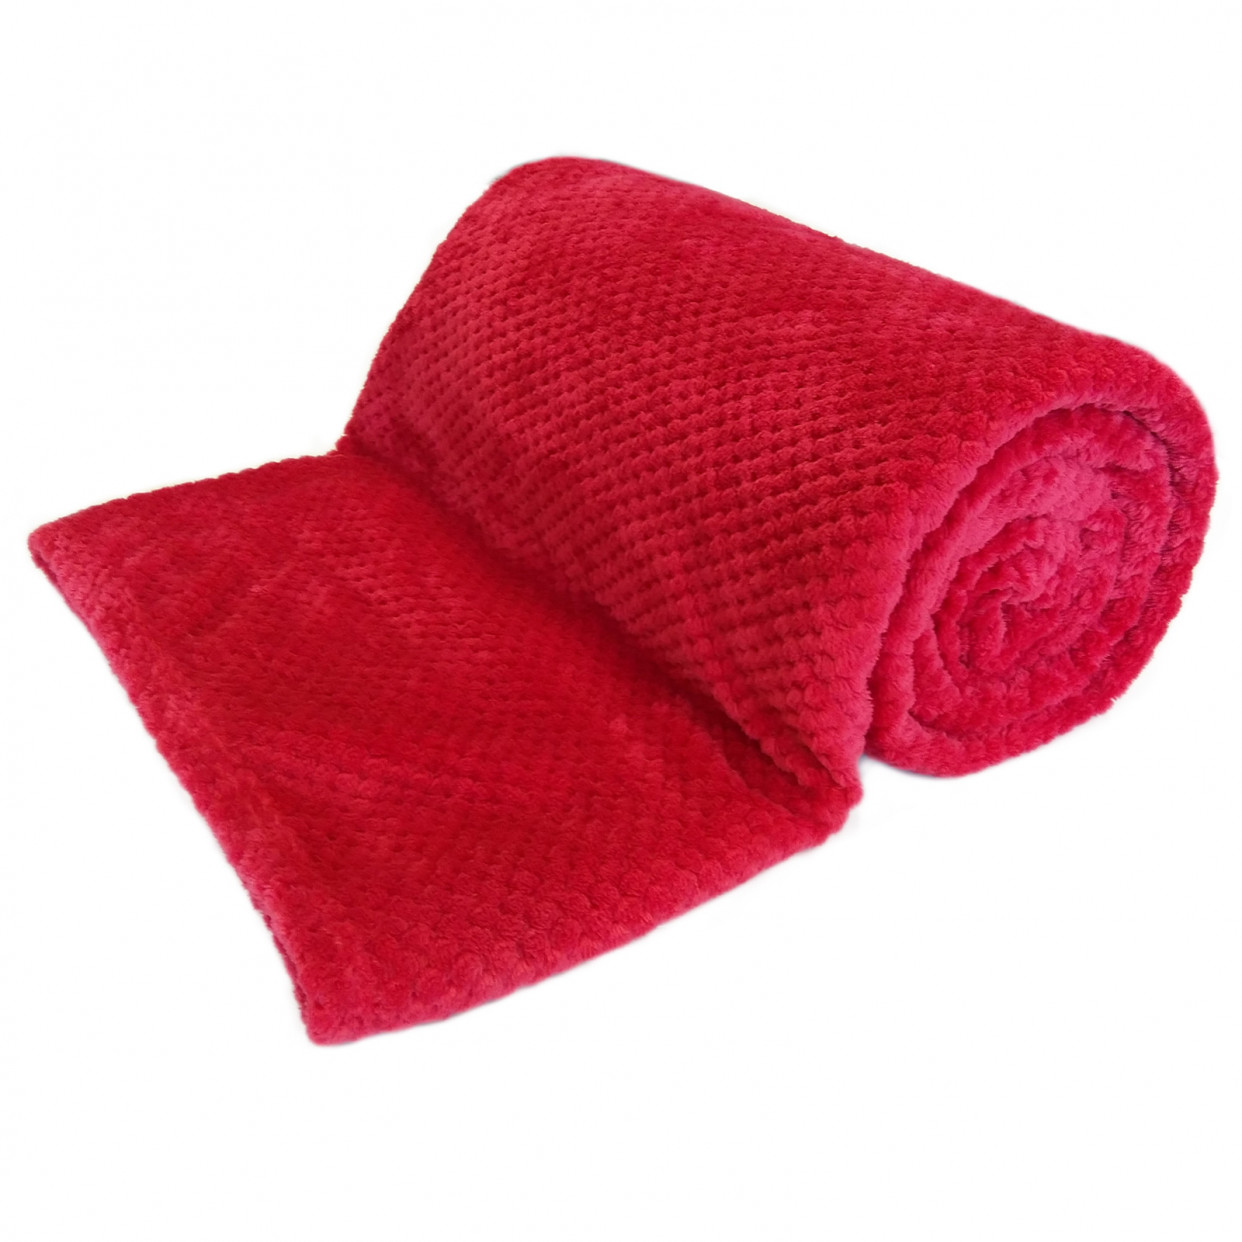 Luxury Waffle Honeycomb Warm Throw Over Sofa Bed Soft Blanket 200 x 240cm Red>